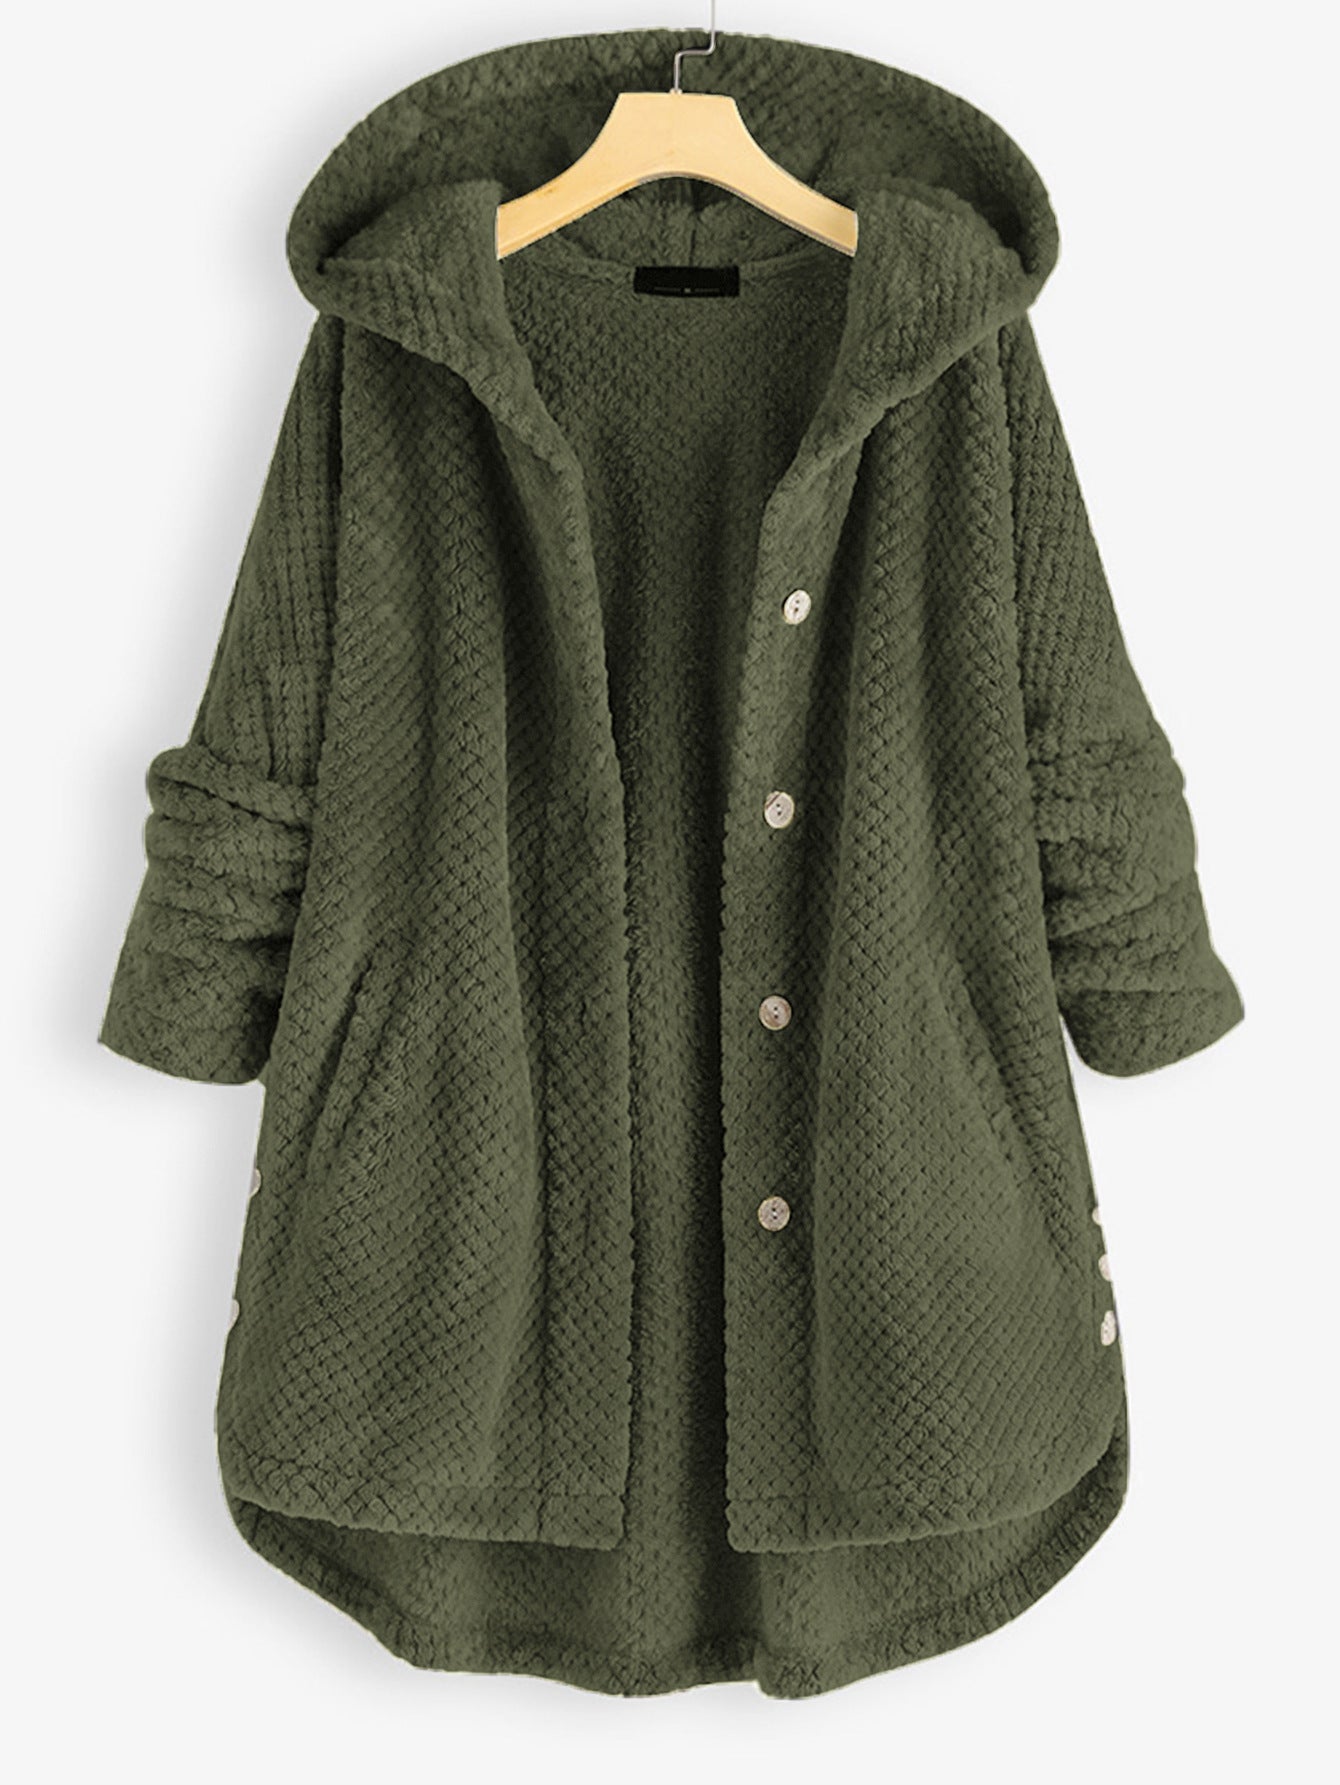 Casual Women Velvet Puls Sizes Hoodies Overcoat-Outerwear-Army Green-S-Free Shipping at meselling99